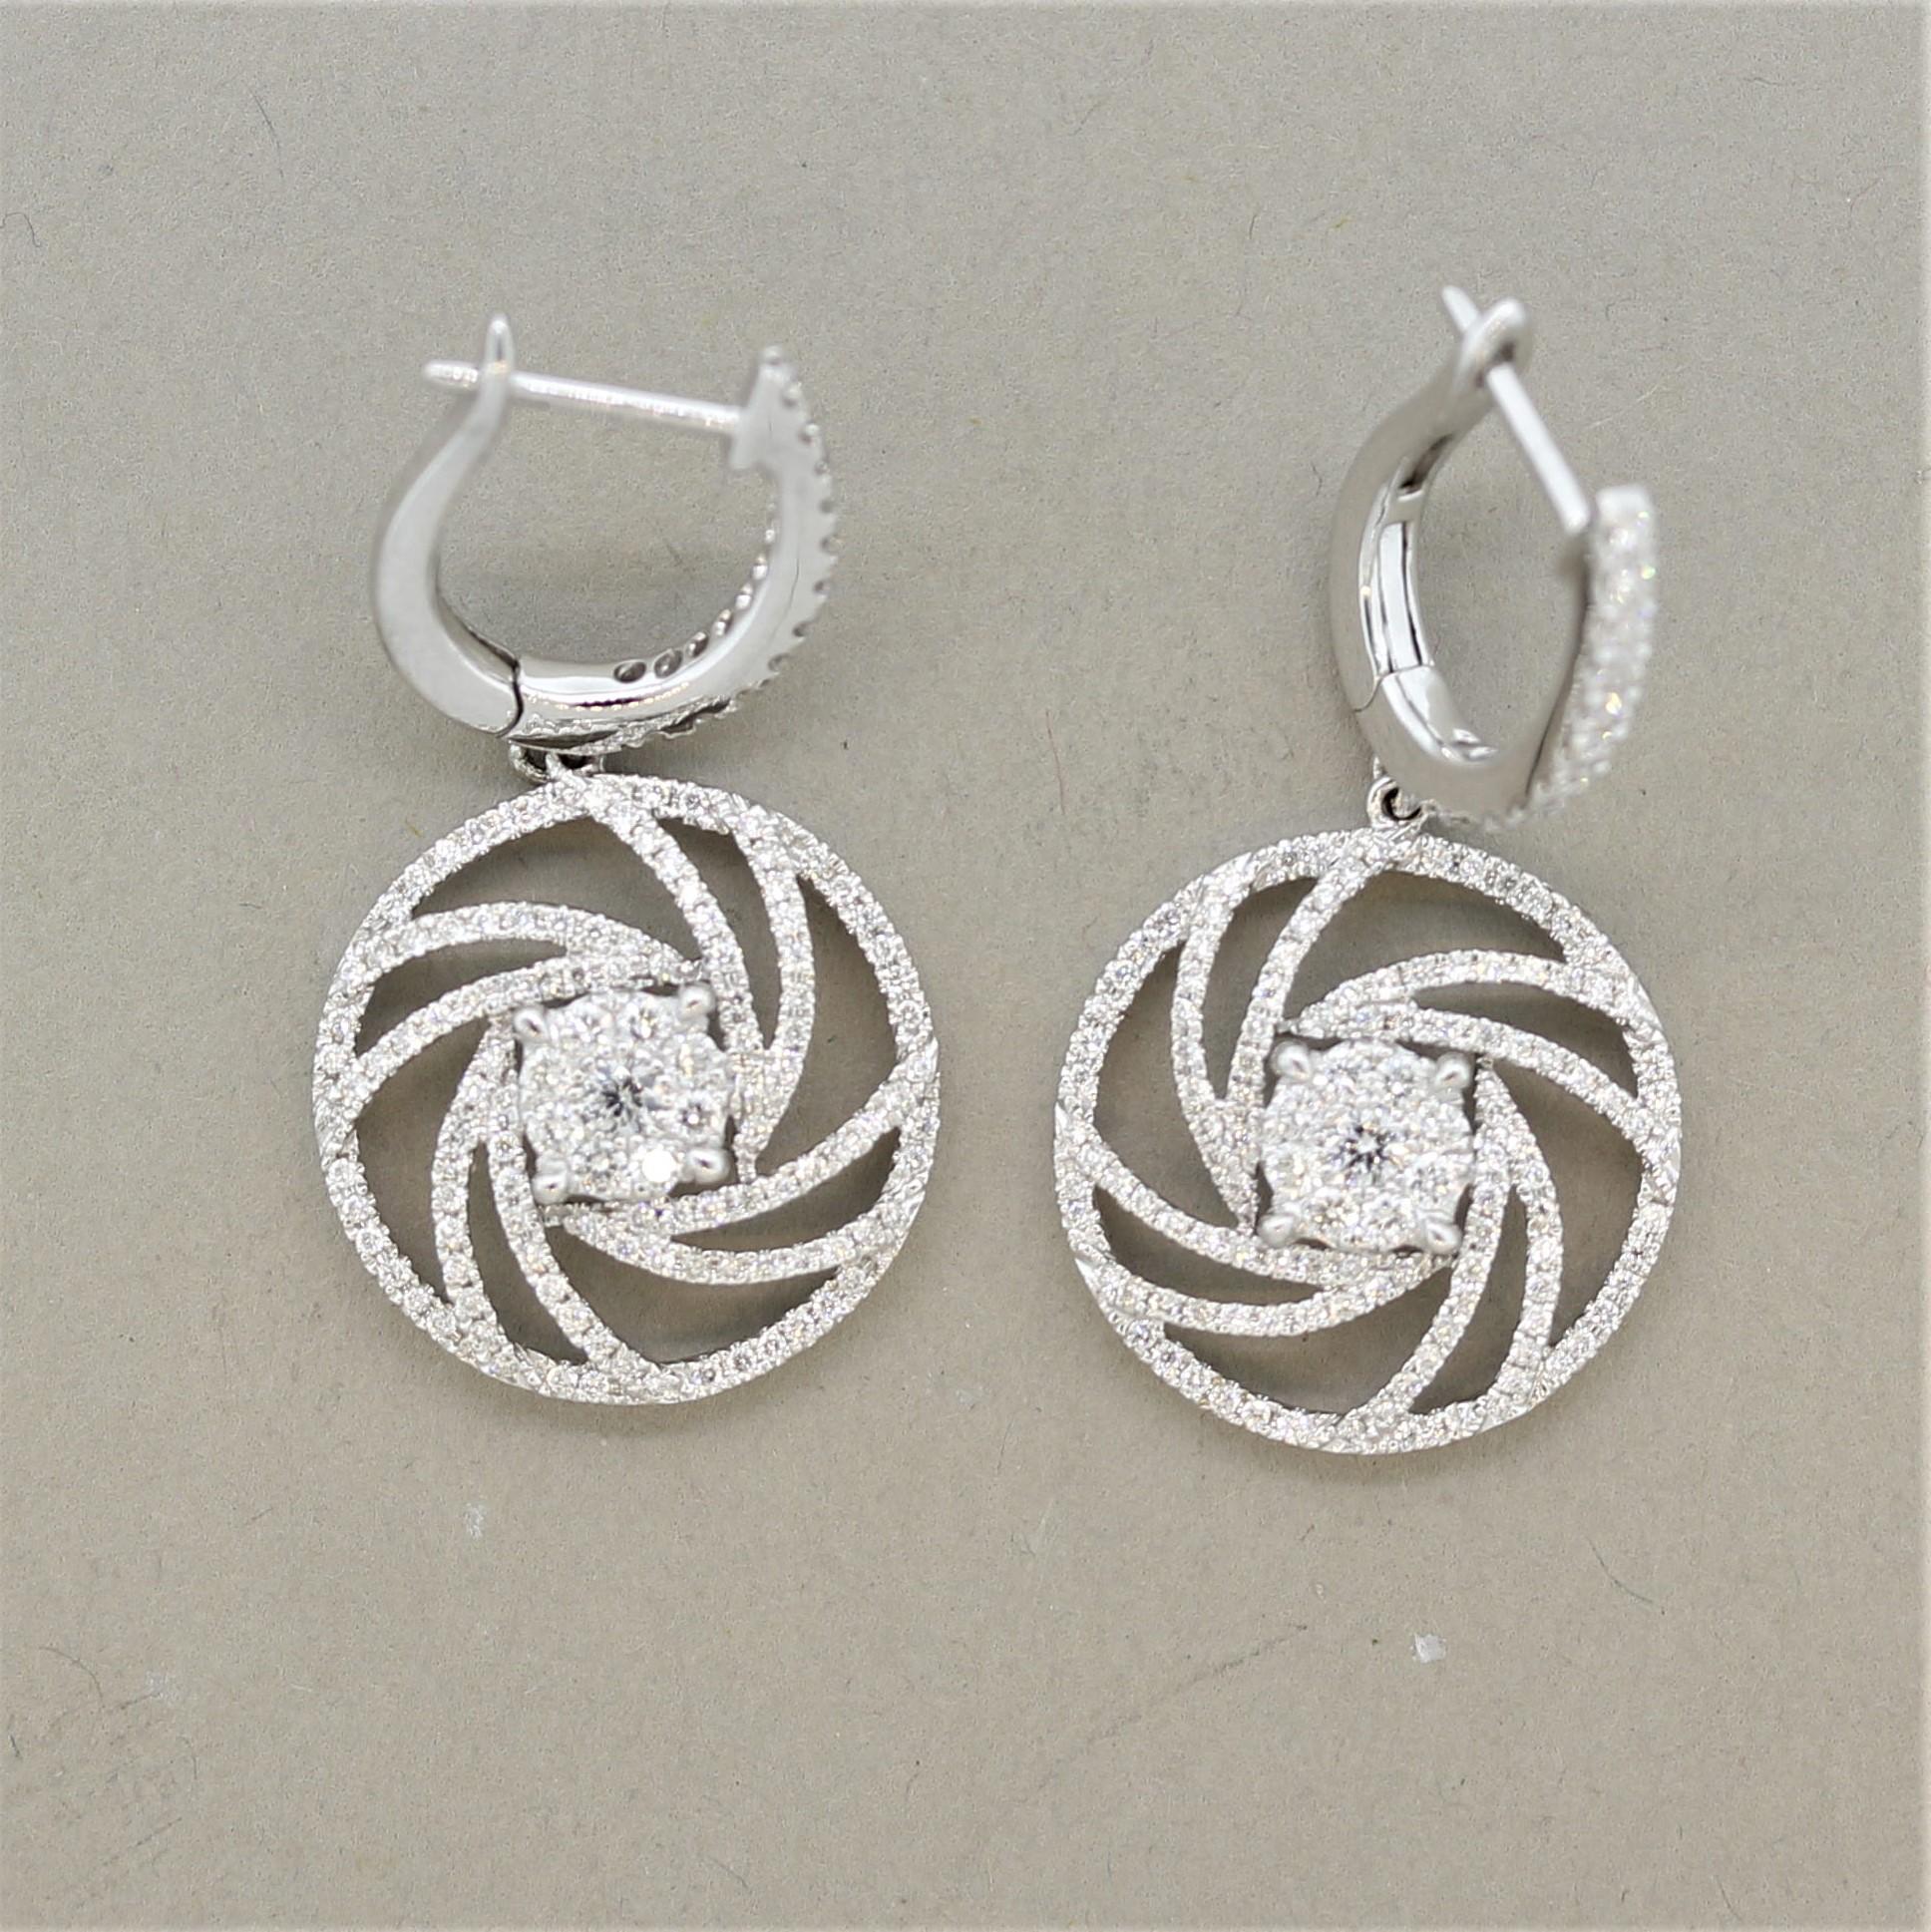 A stylish and classy pair of earrings featuring 1.08 carats of round brilliant cut diamonds. They are set in a swirl pattern around the earrings as well as in a small cluster in the center of the earrings. Made in 18k white gold and ready to be